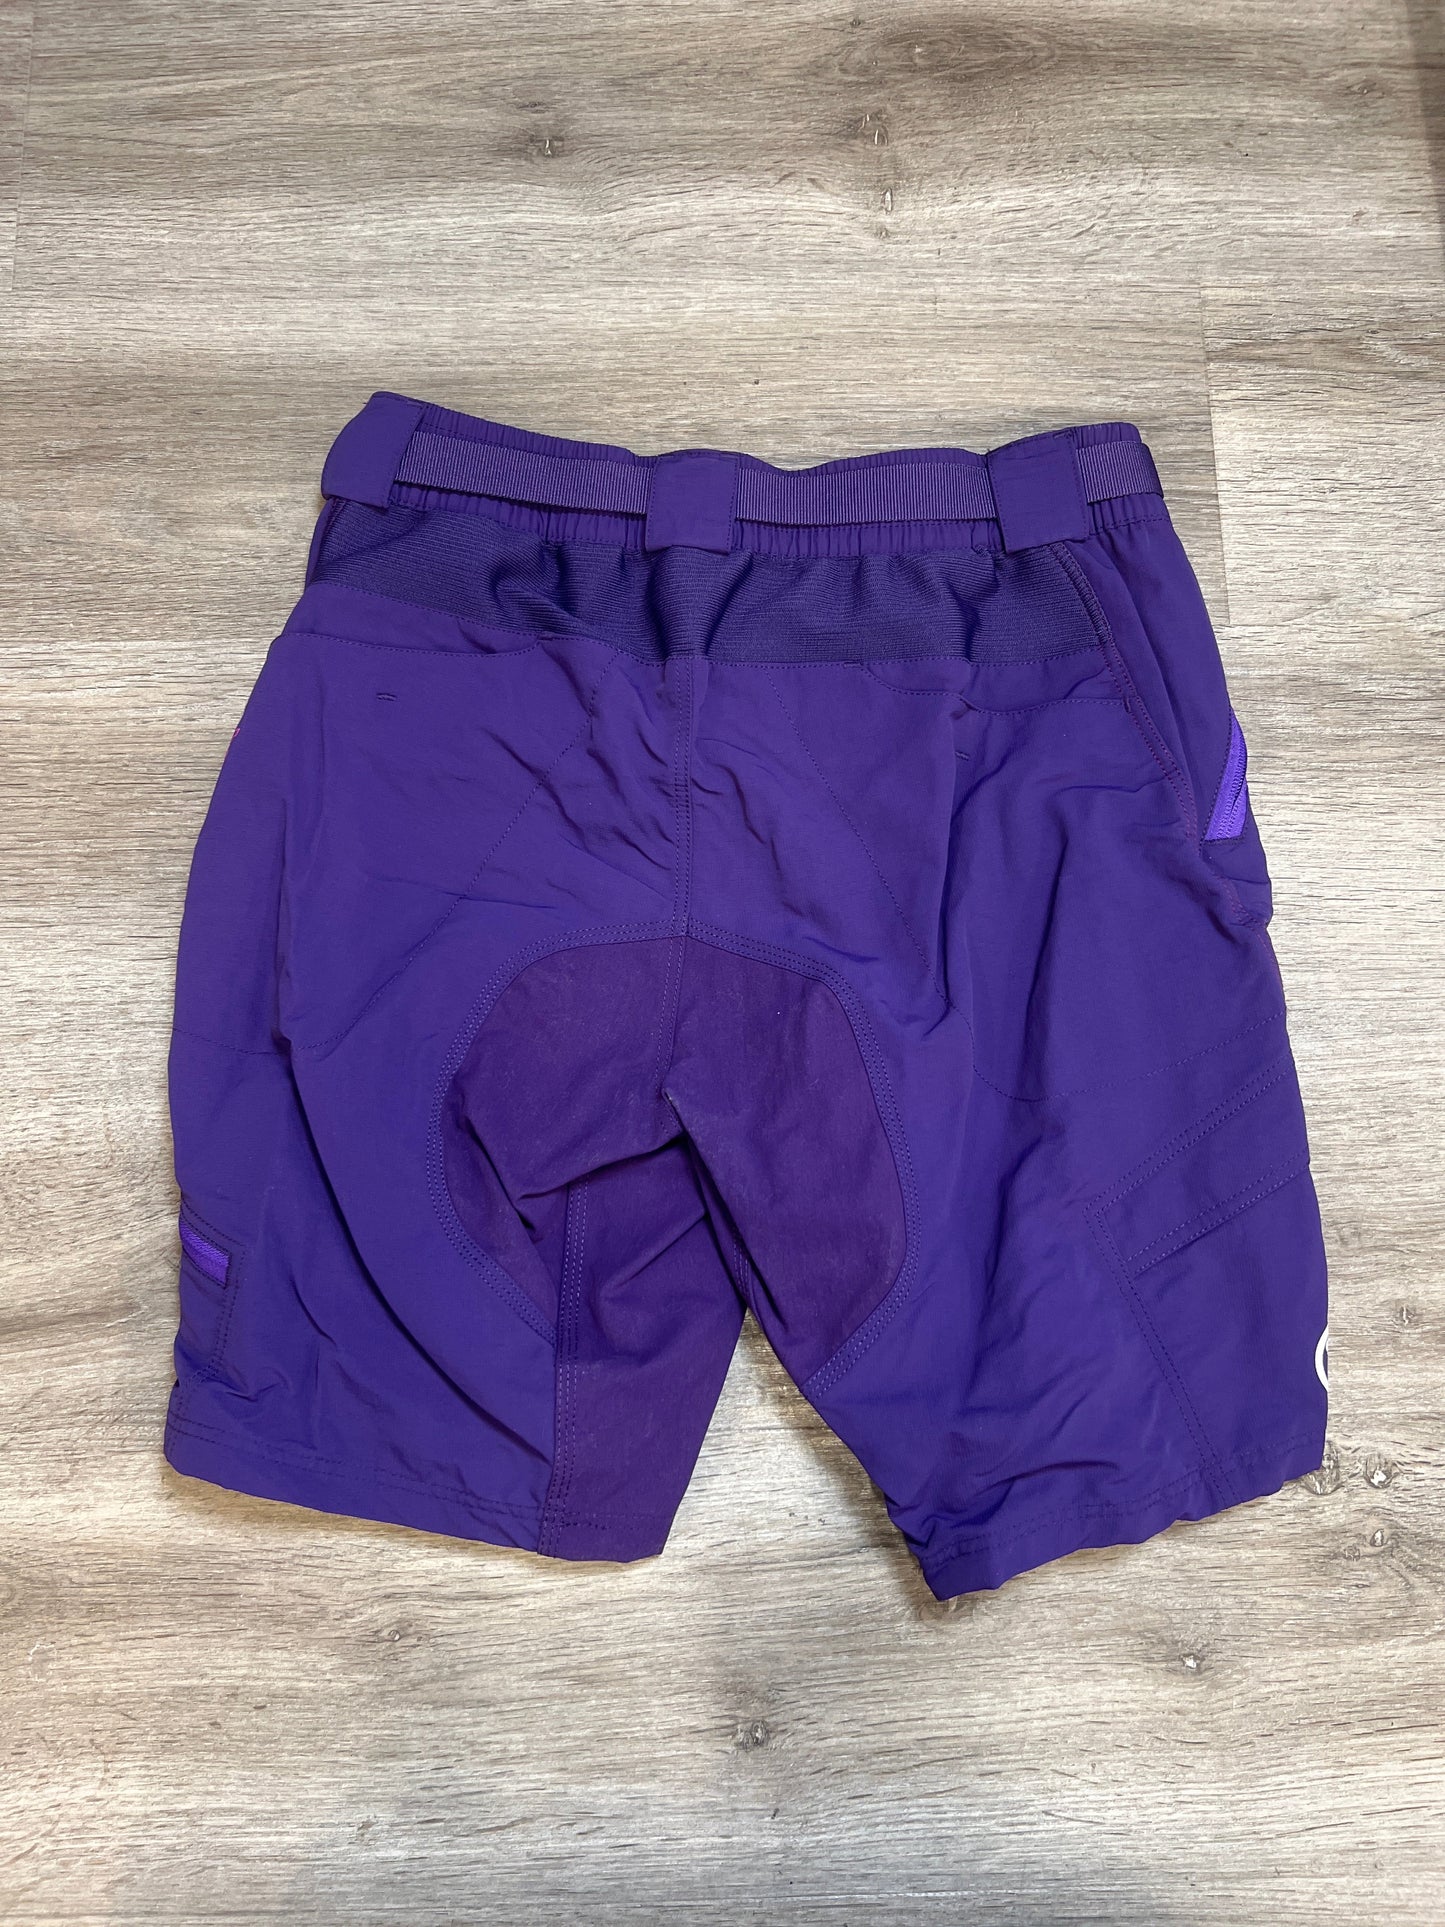 Shorts By Endura  Size: S